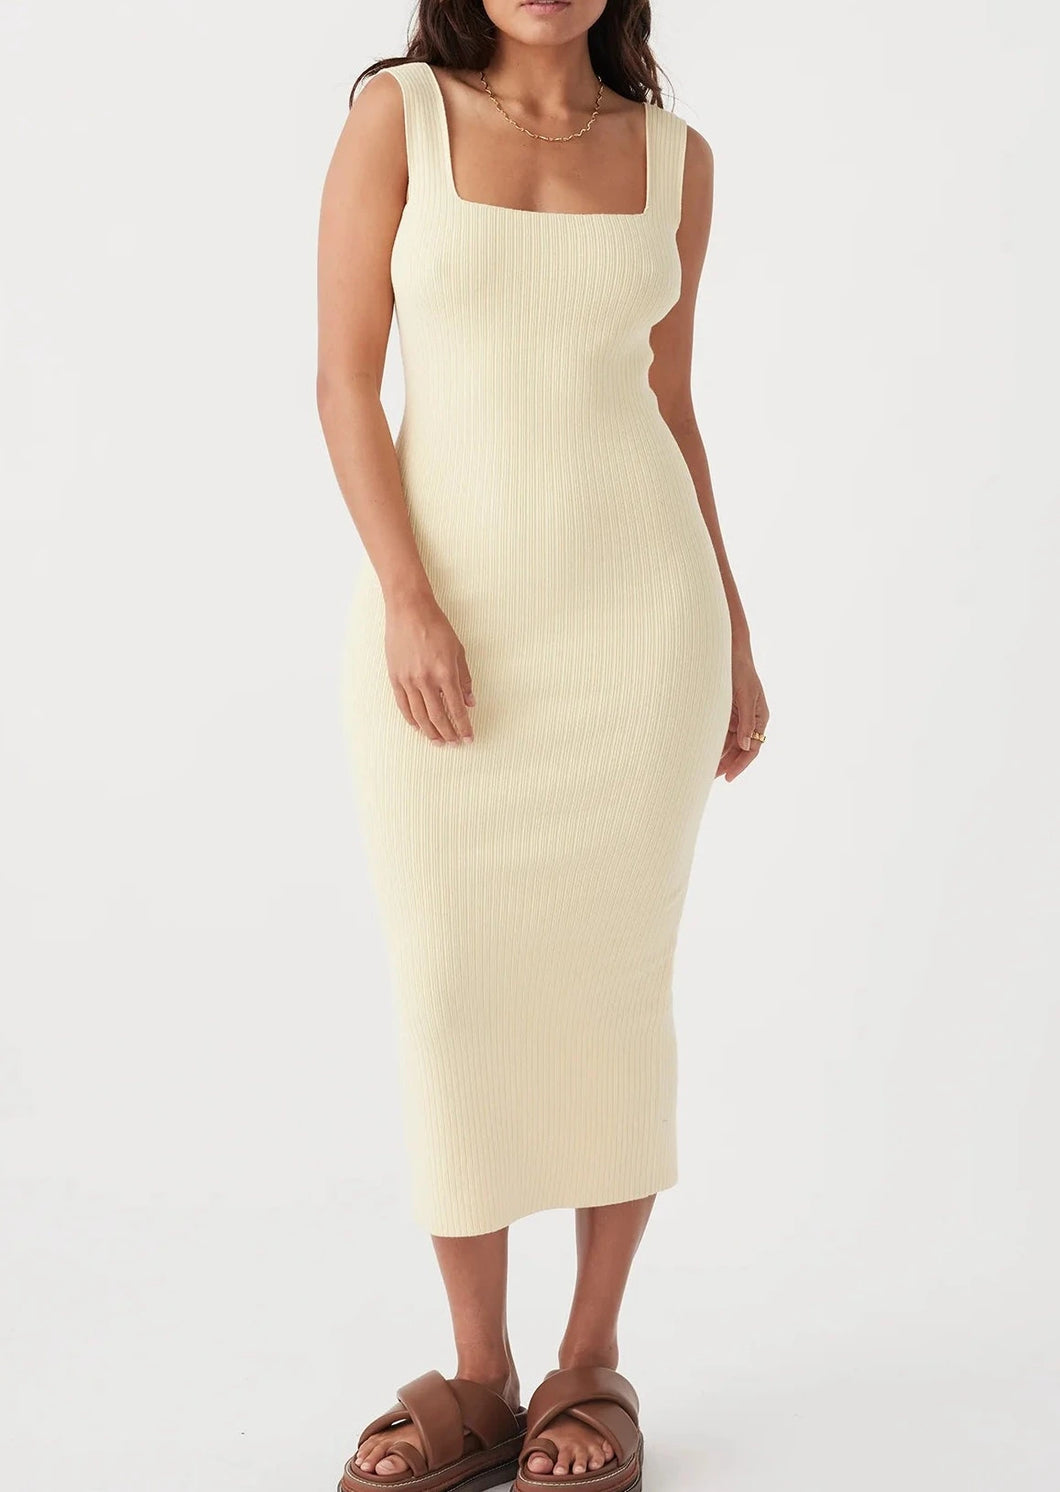 Tully Dress - Butter (Size S)